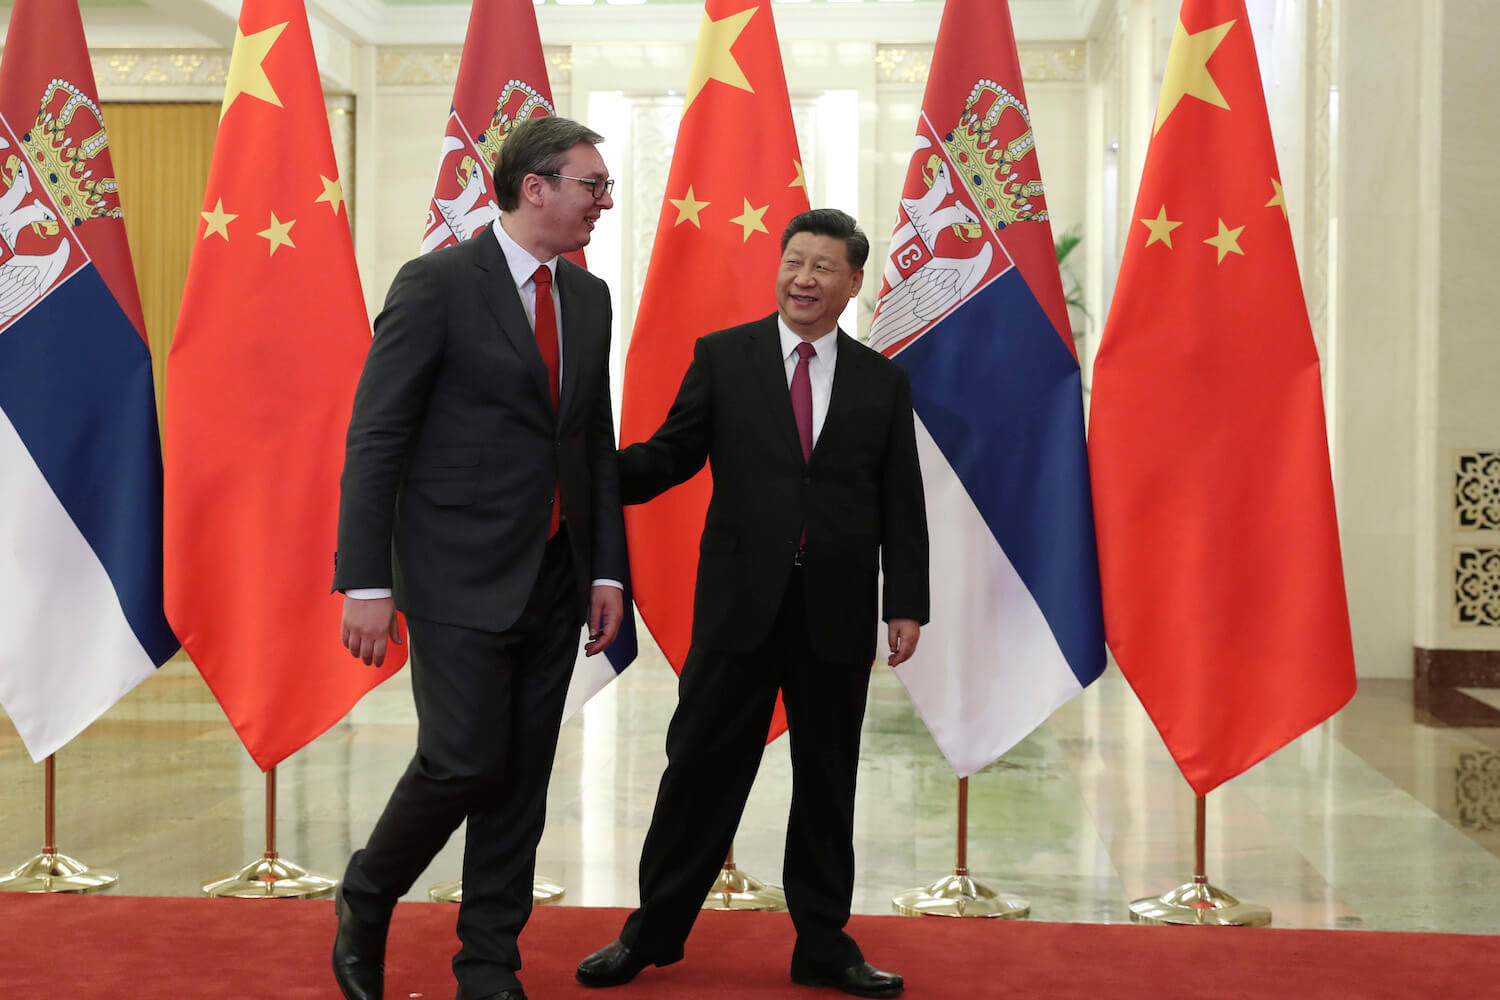 Serbia Buys New Missile Defense System From China